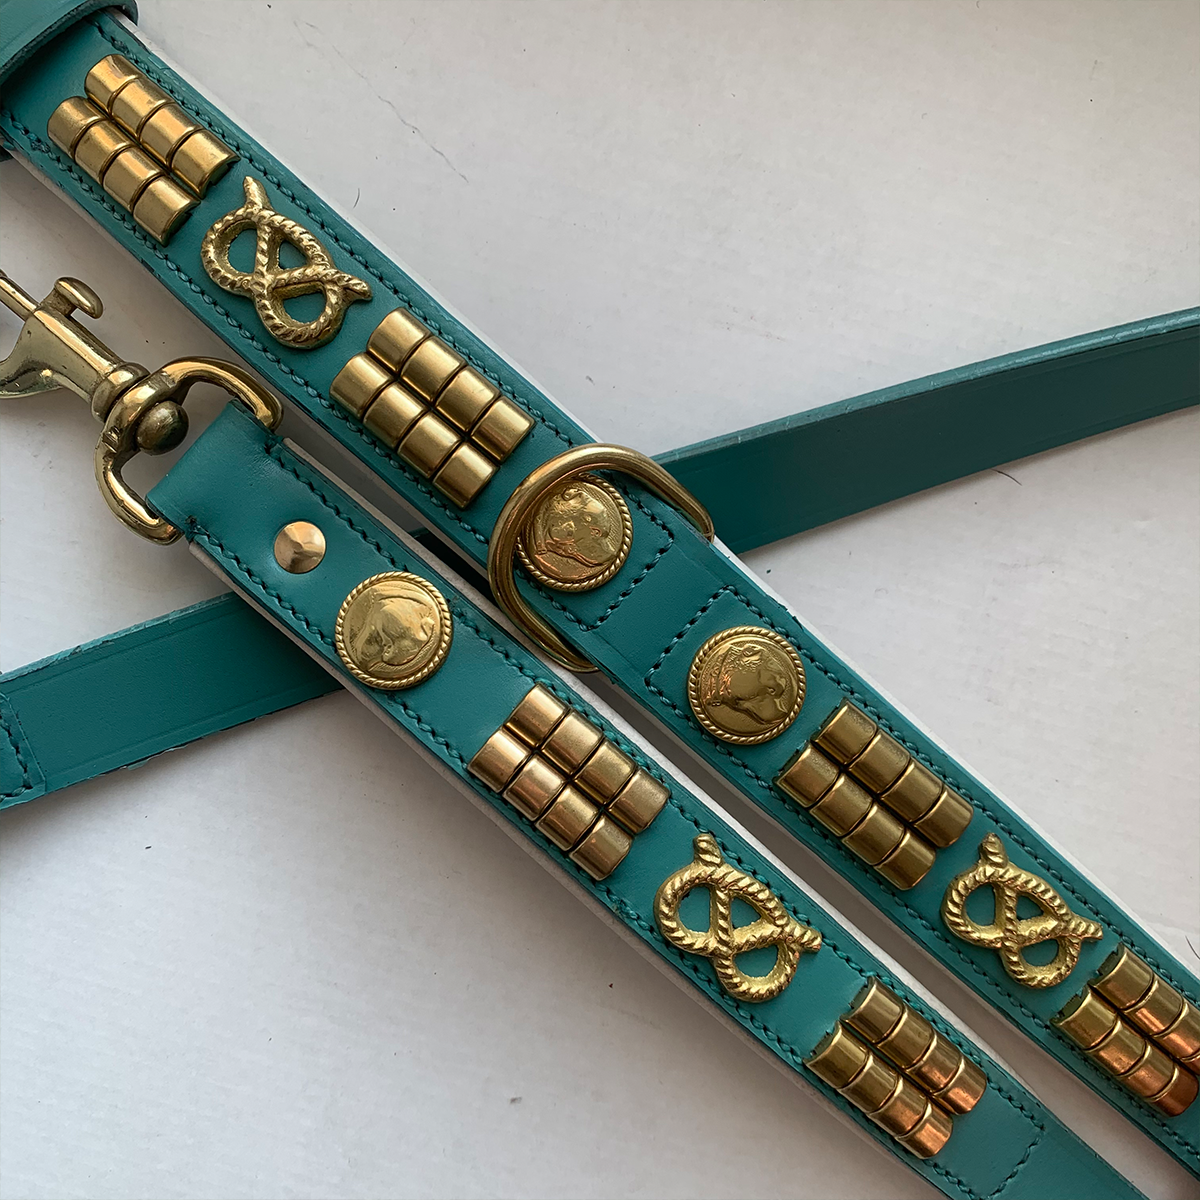 Leather Collar & Leash Set - Jefferson - Turquoise/white Gold - Staffordshire Bull Terrier 1935